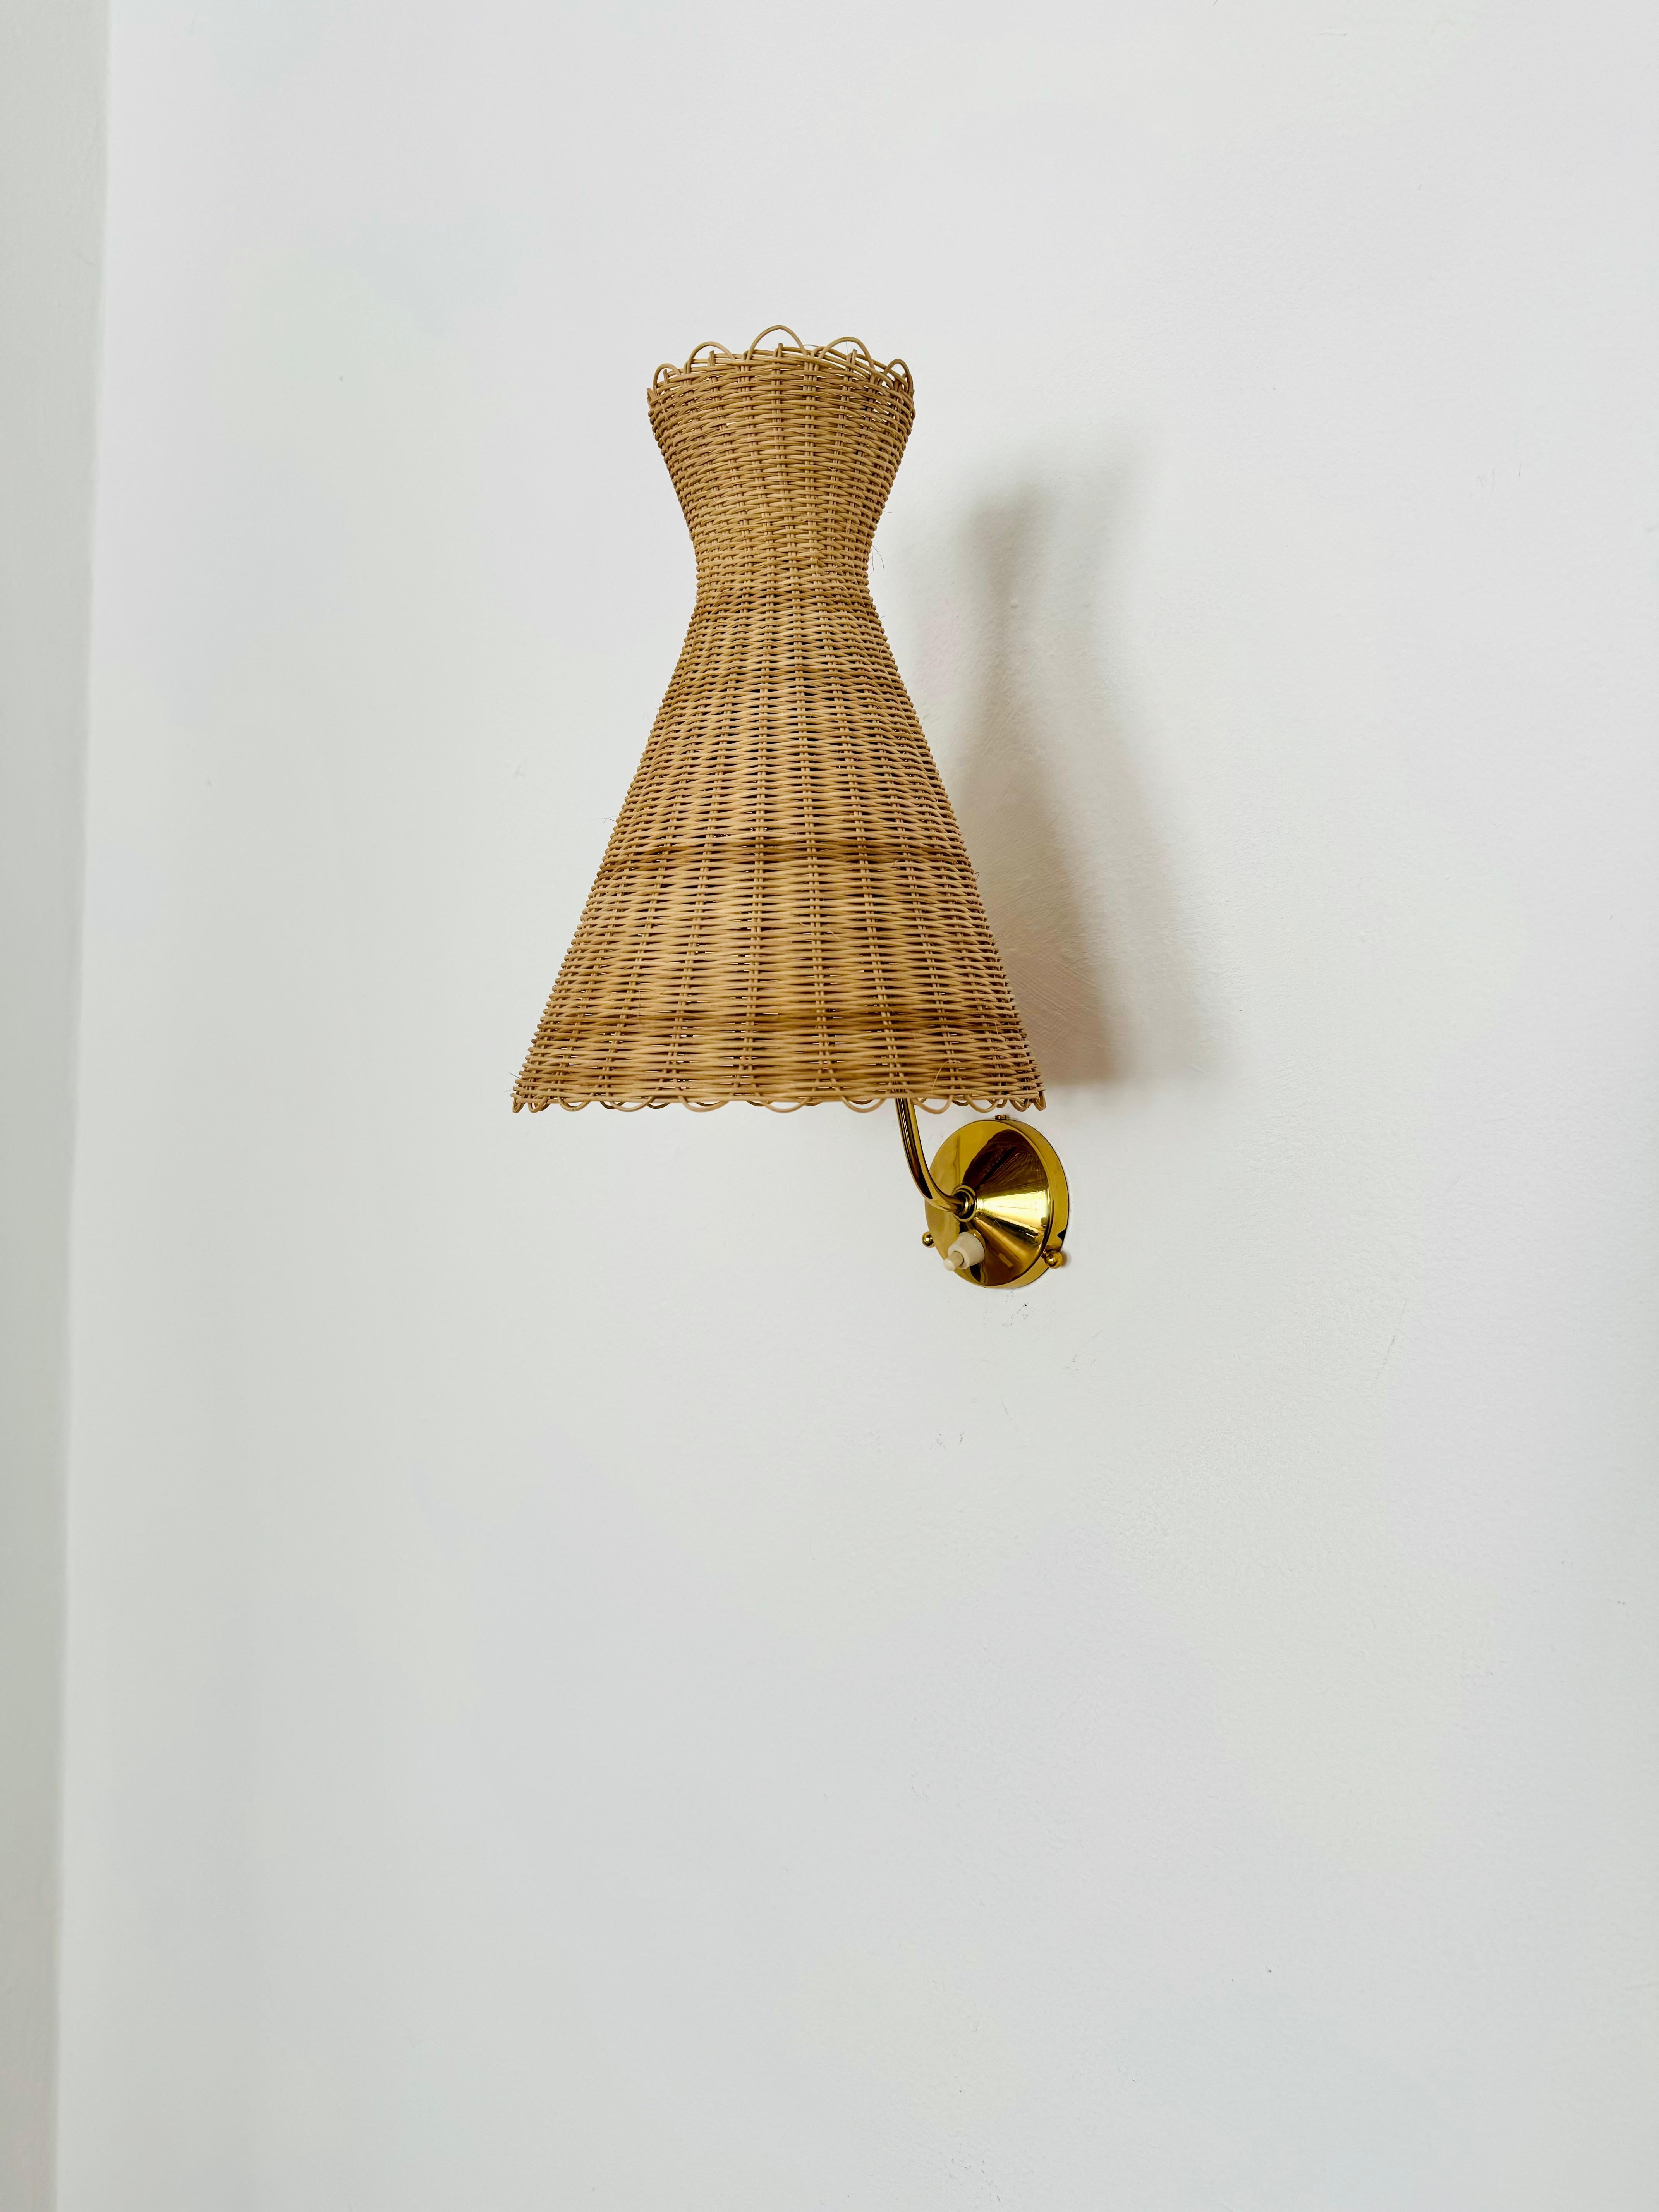 Wonderful Kiwi wall lamp from the 1950s.
Great and exceptional design with a fantastically elegant look.
The rattan lampshade creates a very cozy atmosphere and a spectacular play of light.
Very rare collector's item with original lampshade

Design: